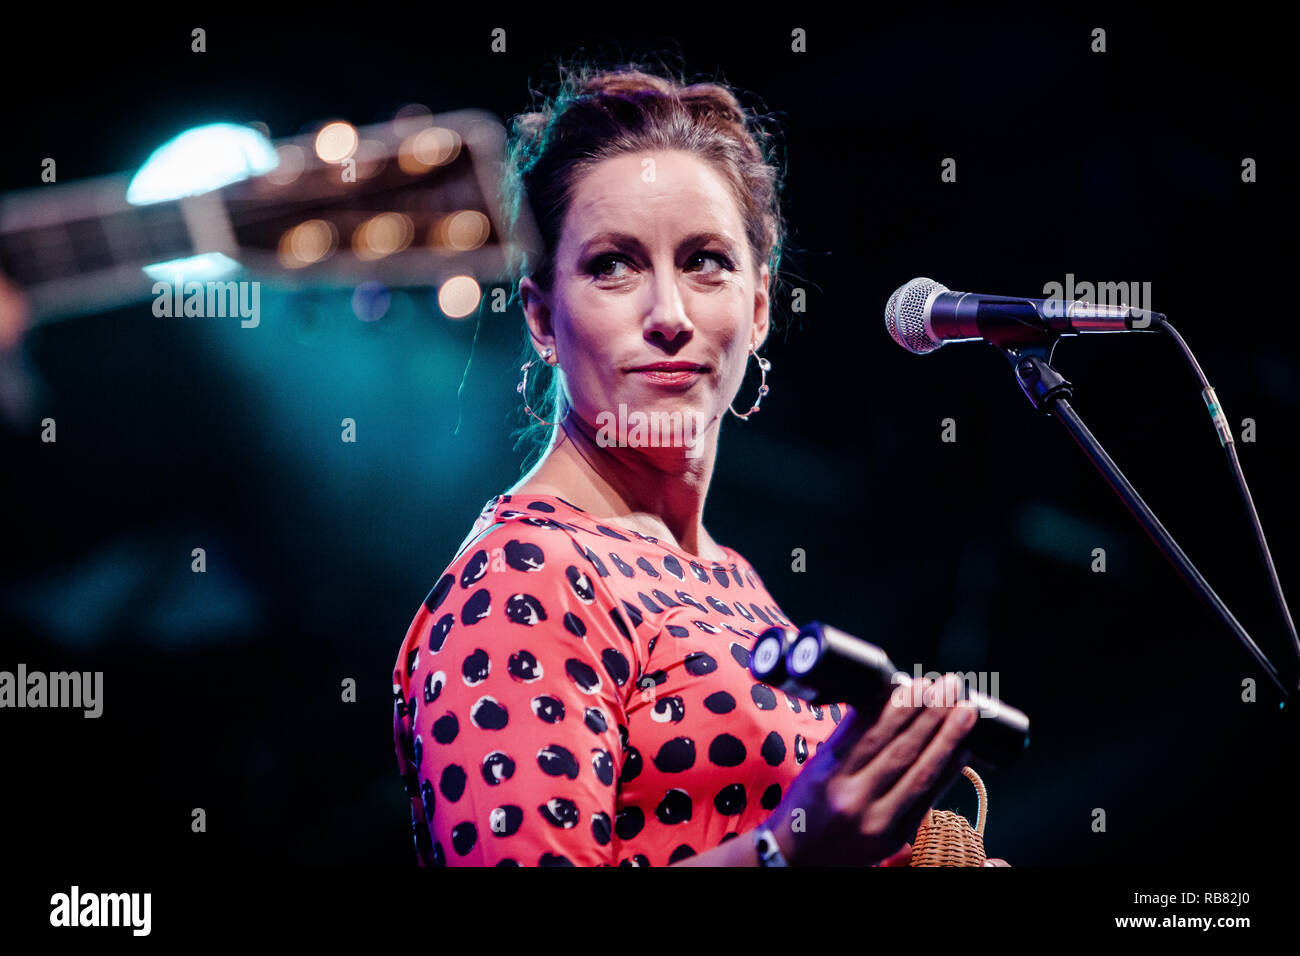 Lisa Nilsson The Swedish Singer And Songwriter Performs A Live Concert At The Danish Folk Blues And Country Music Festival Tonder Festival 15 Denmark 29 08 15 Excluding Denmark Stock Photo Alamy